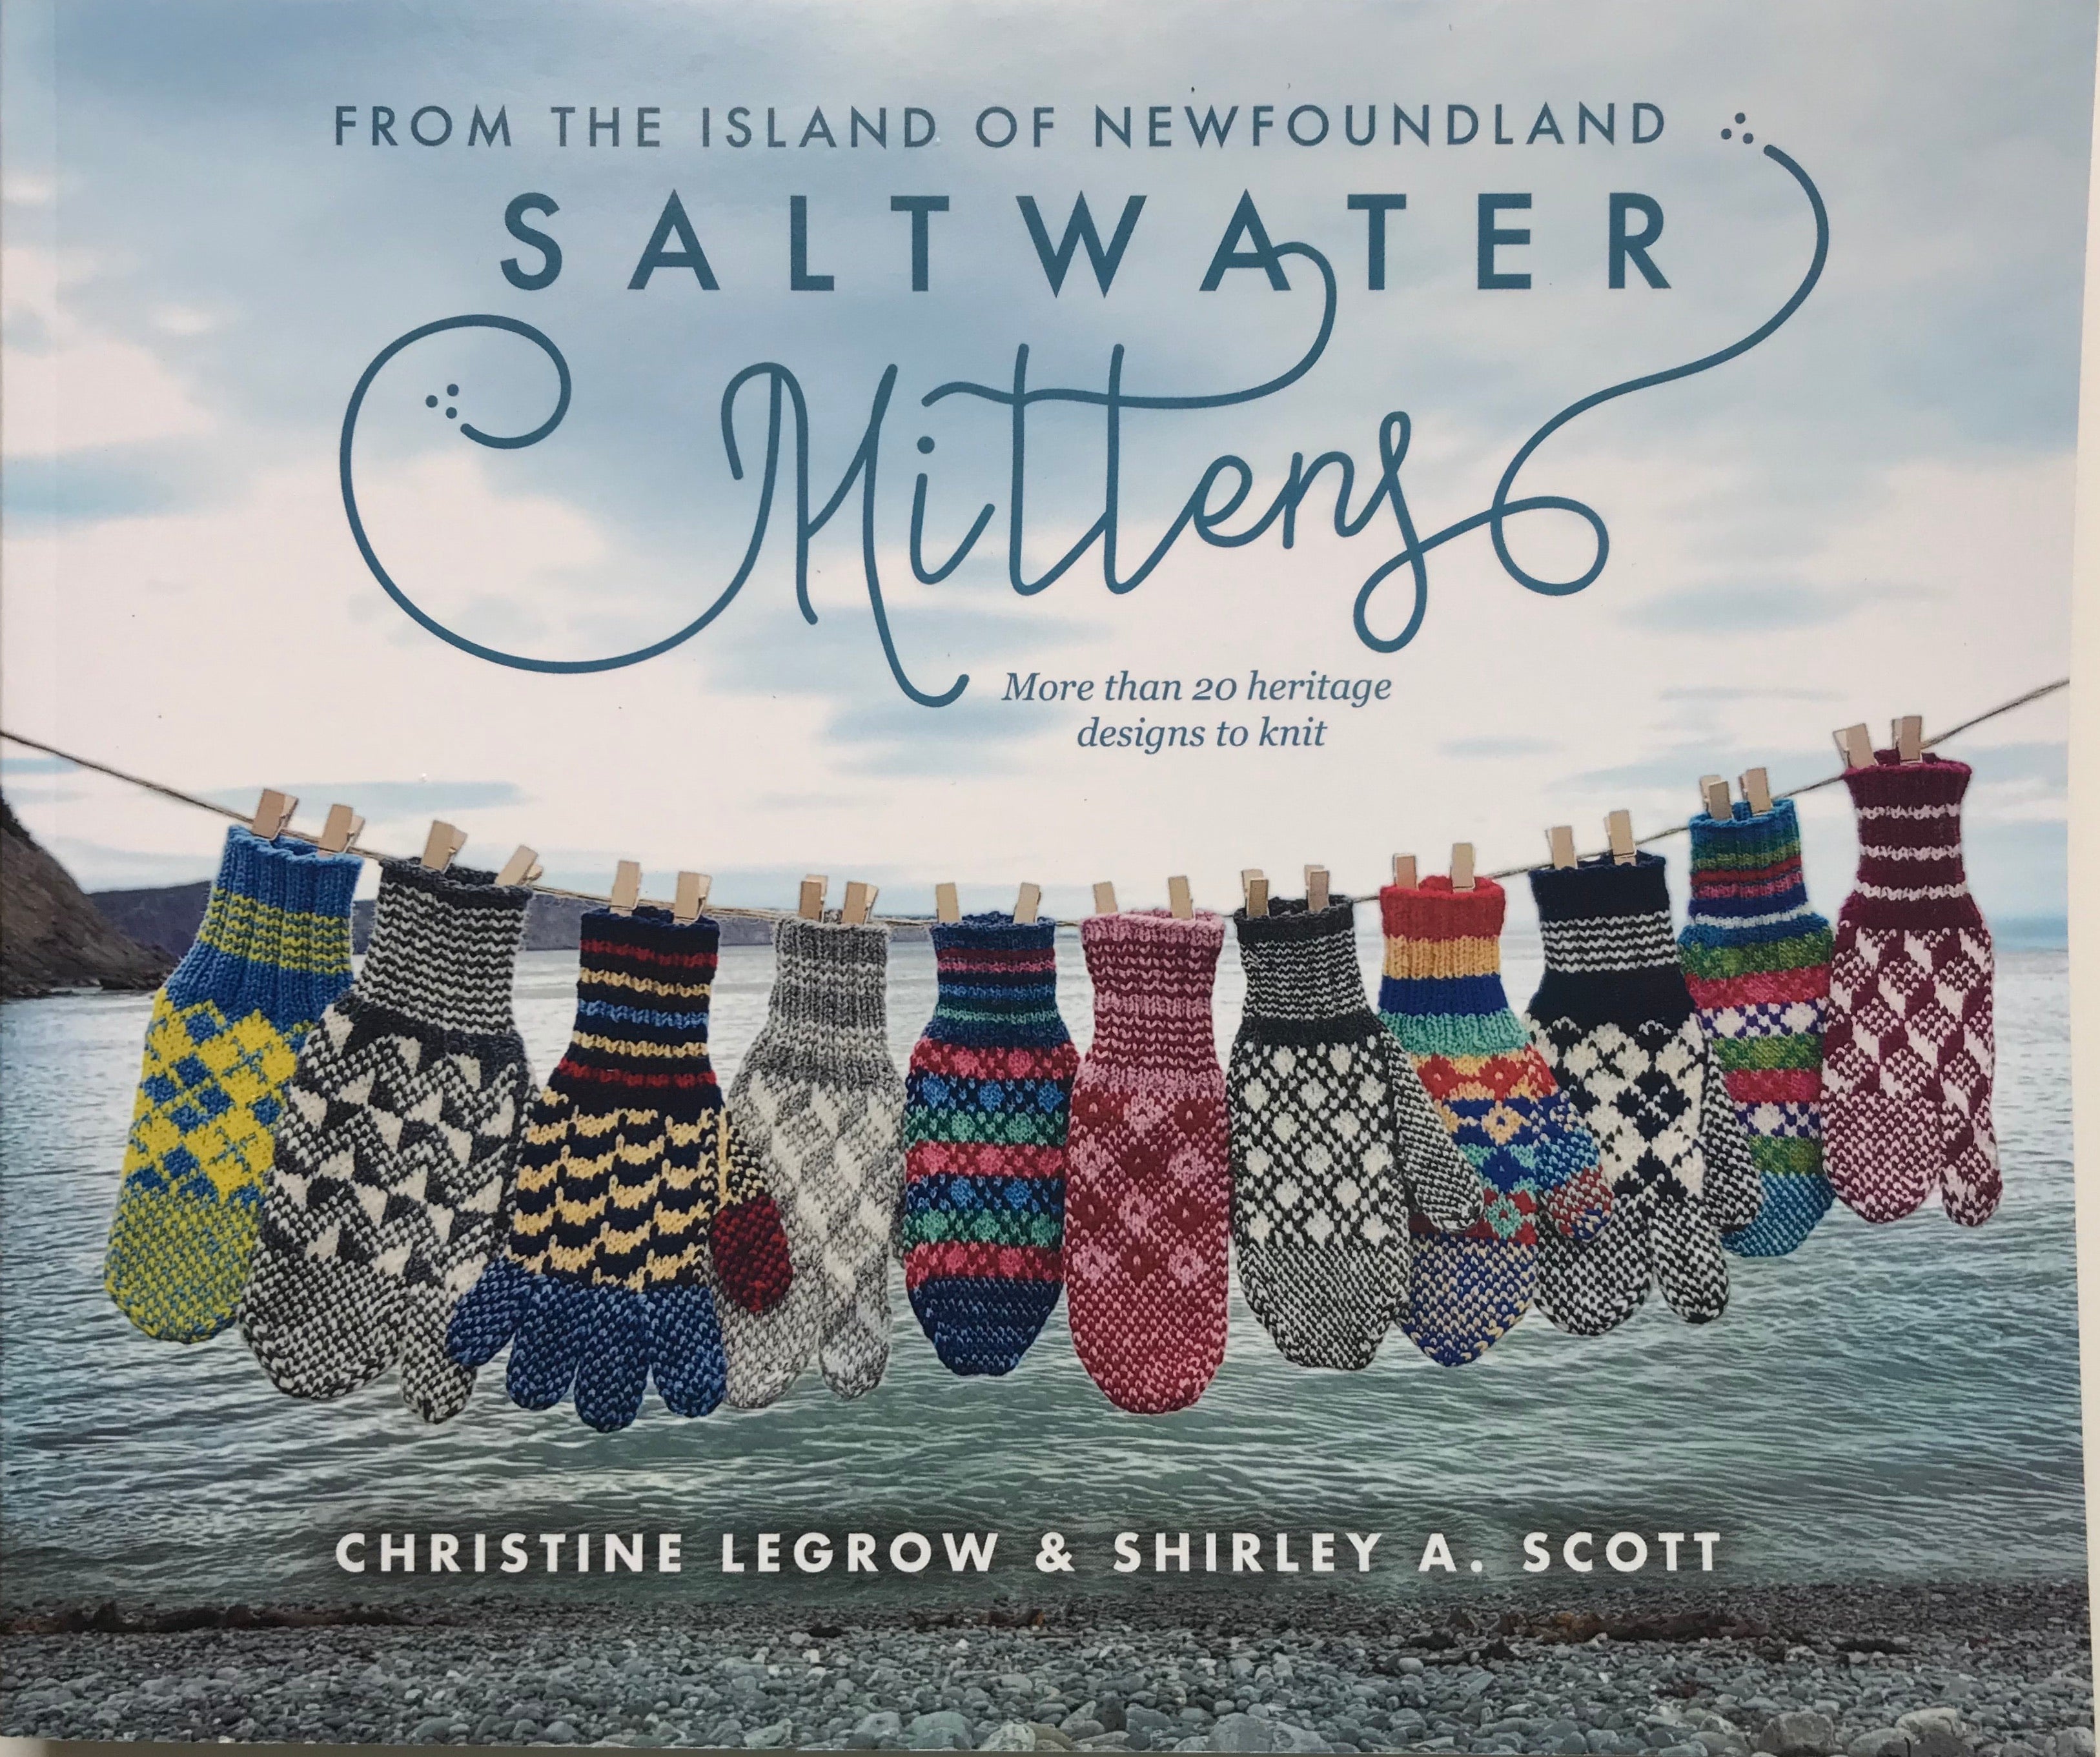 Saltwater Mittens by Christine LeGrow and Shirley A. Scott published by Boulder Books